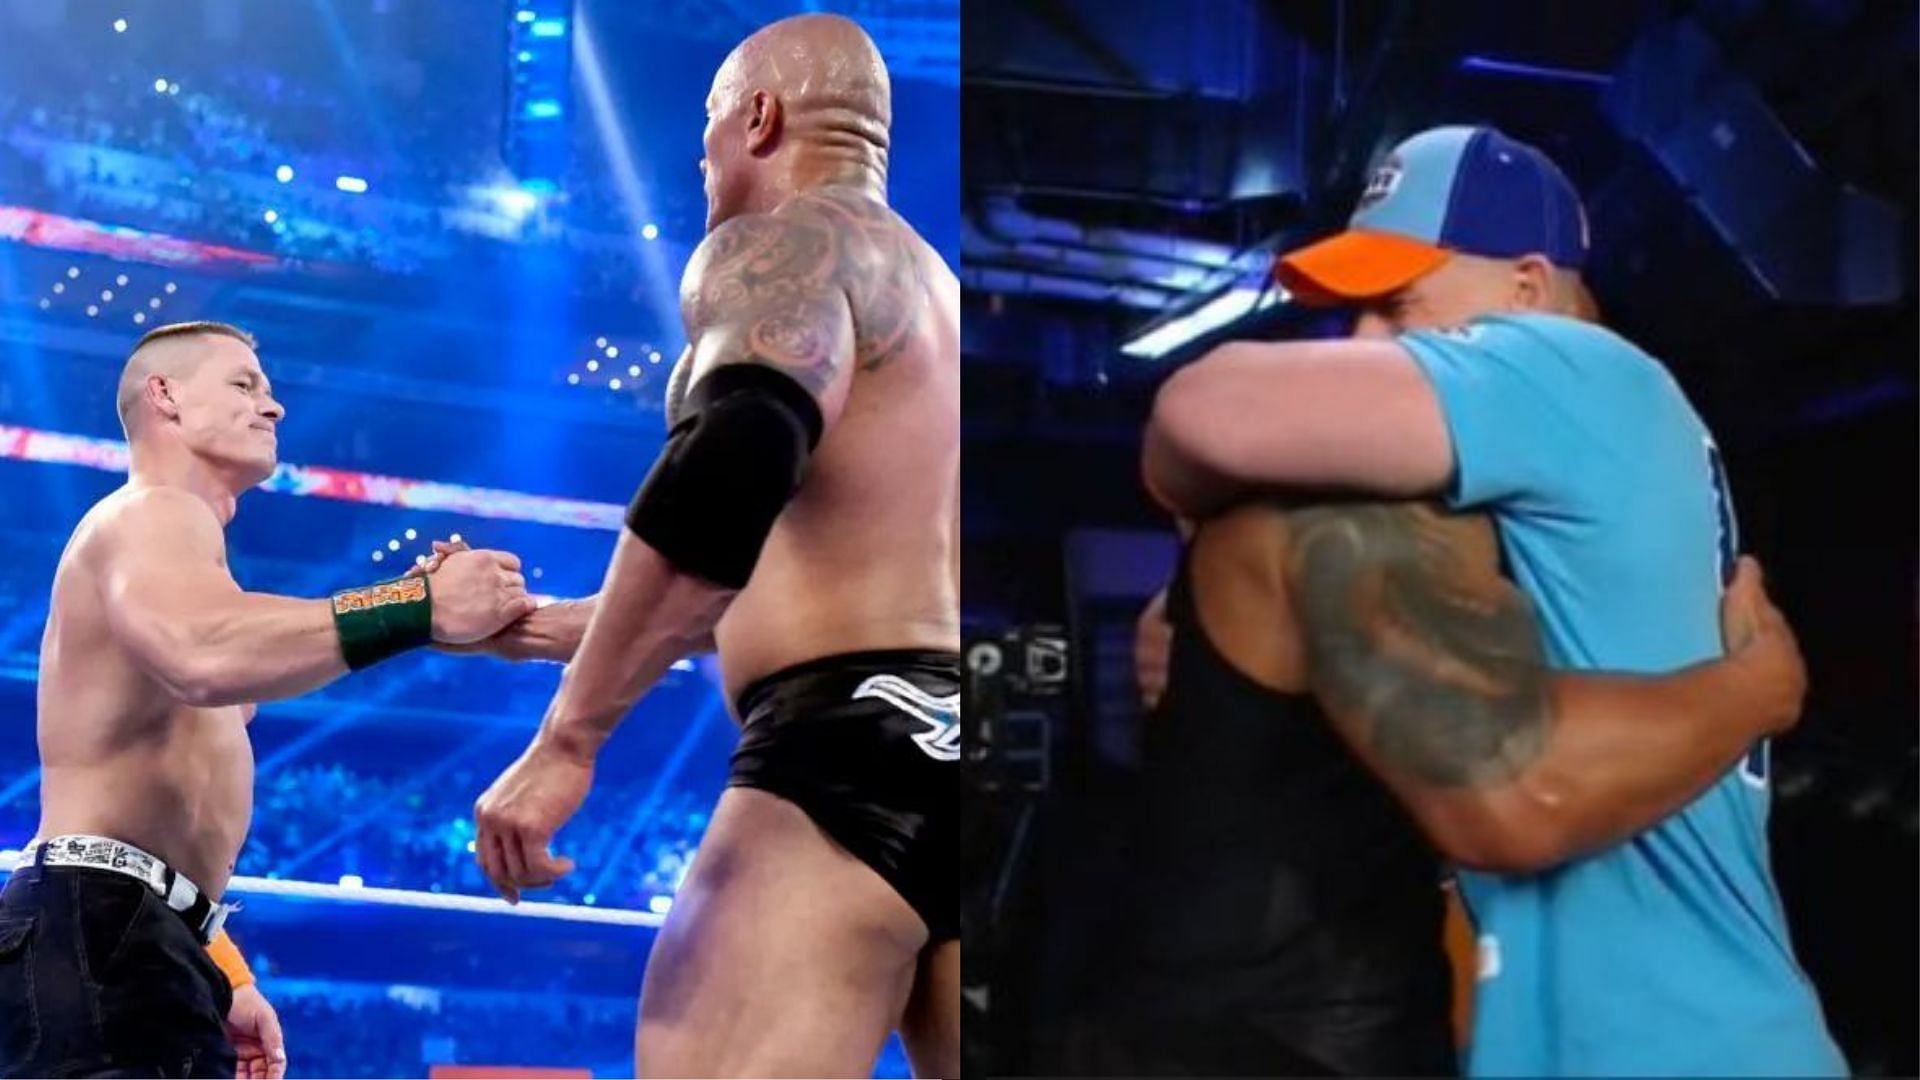 John Cena and The Rock have faced each other twice at WrestleMania